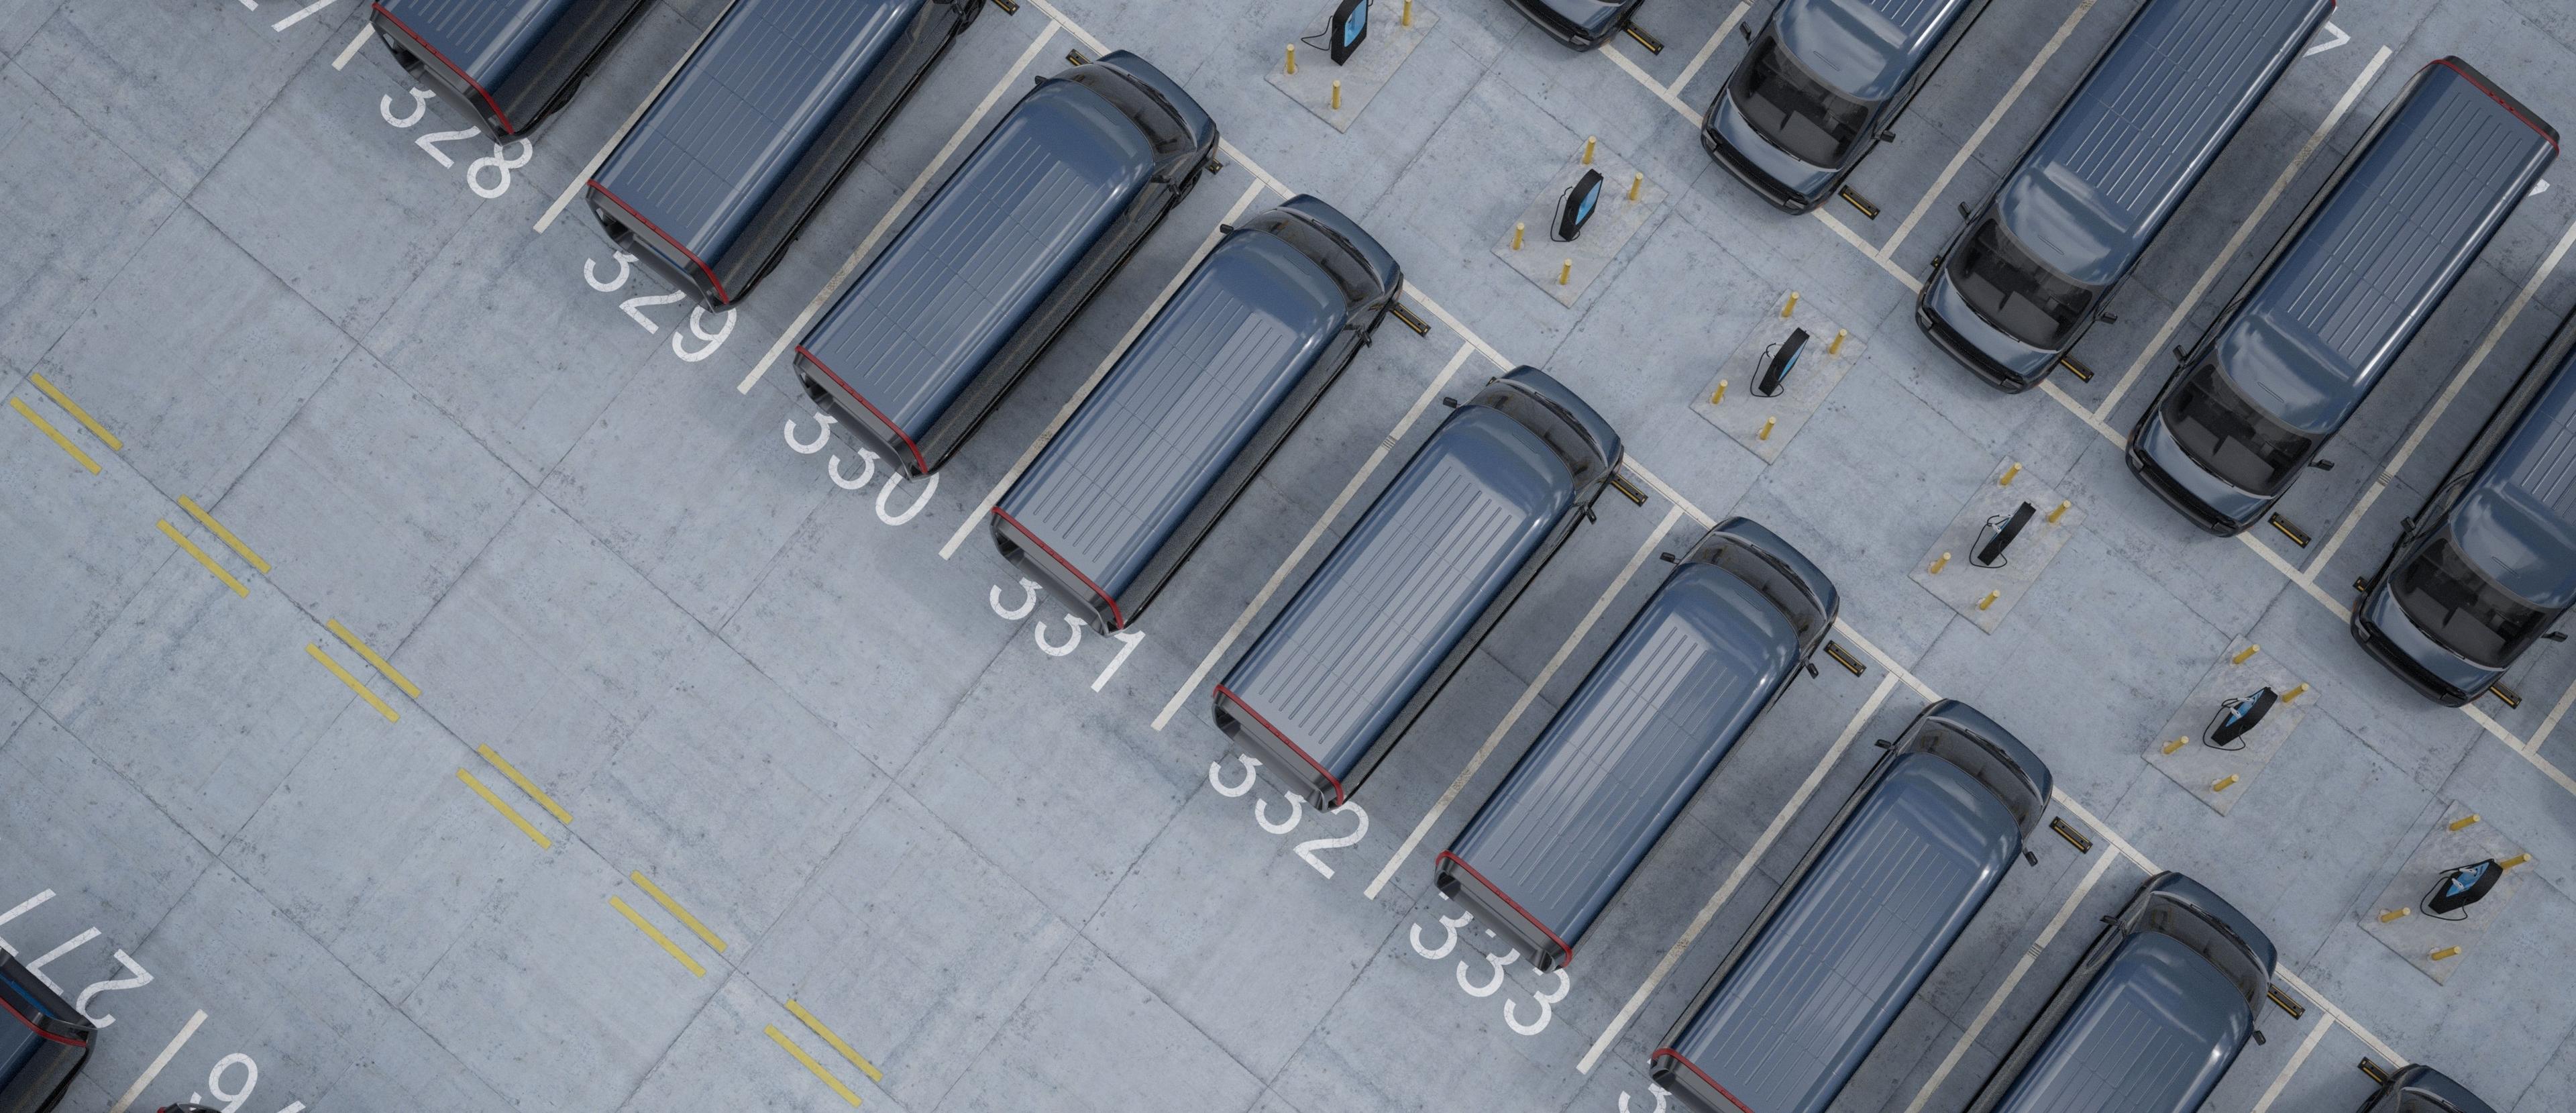 A collection of parked vans